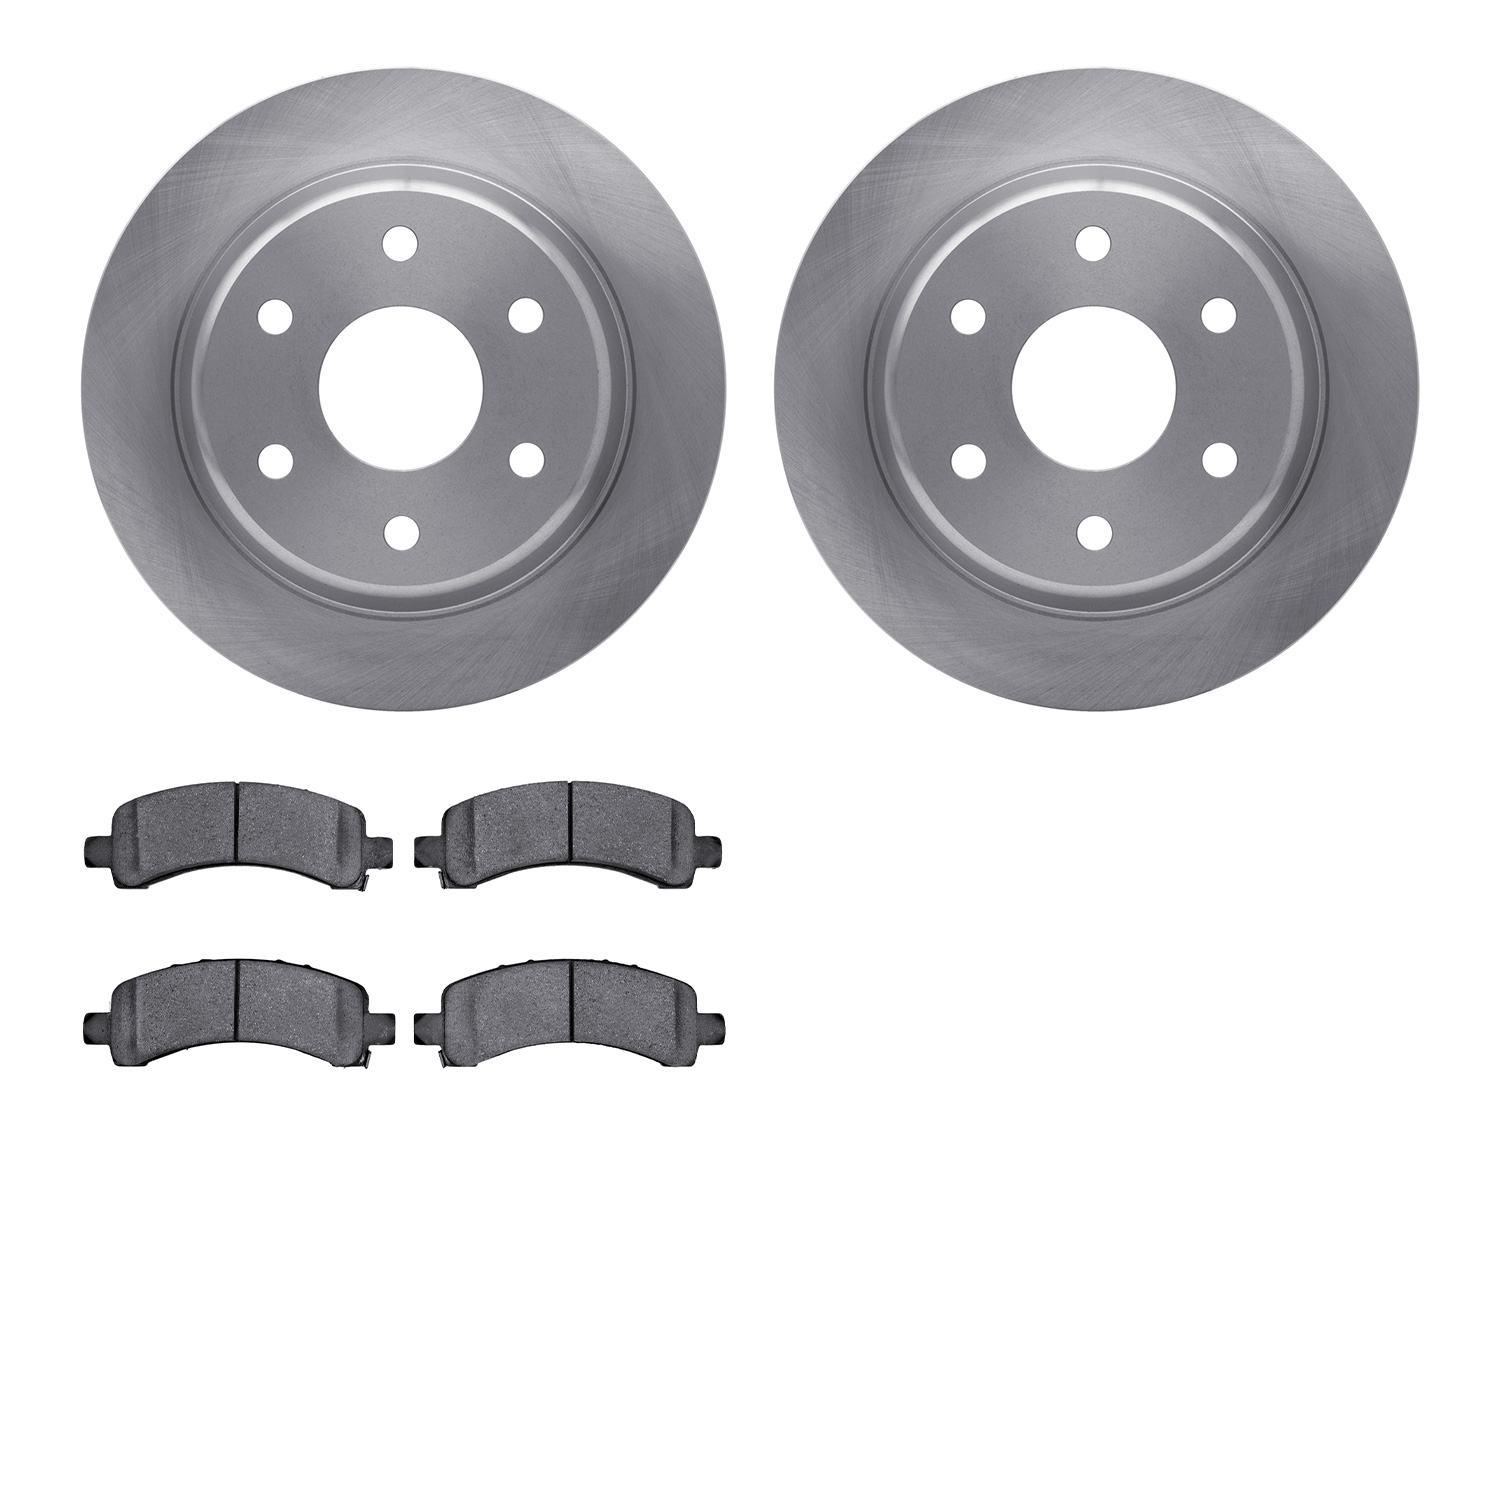 6402-48080 Brake Rotors with Ultimate-Duty Brake Pads, 2002-2014 GM, Position: Rear